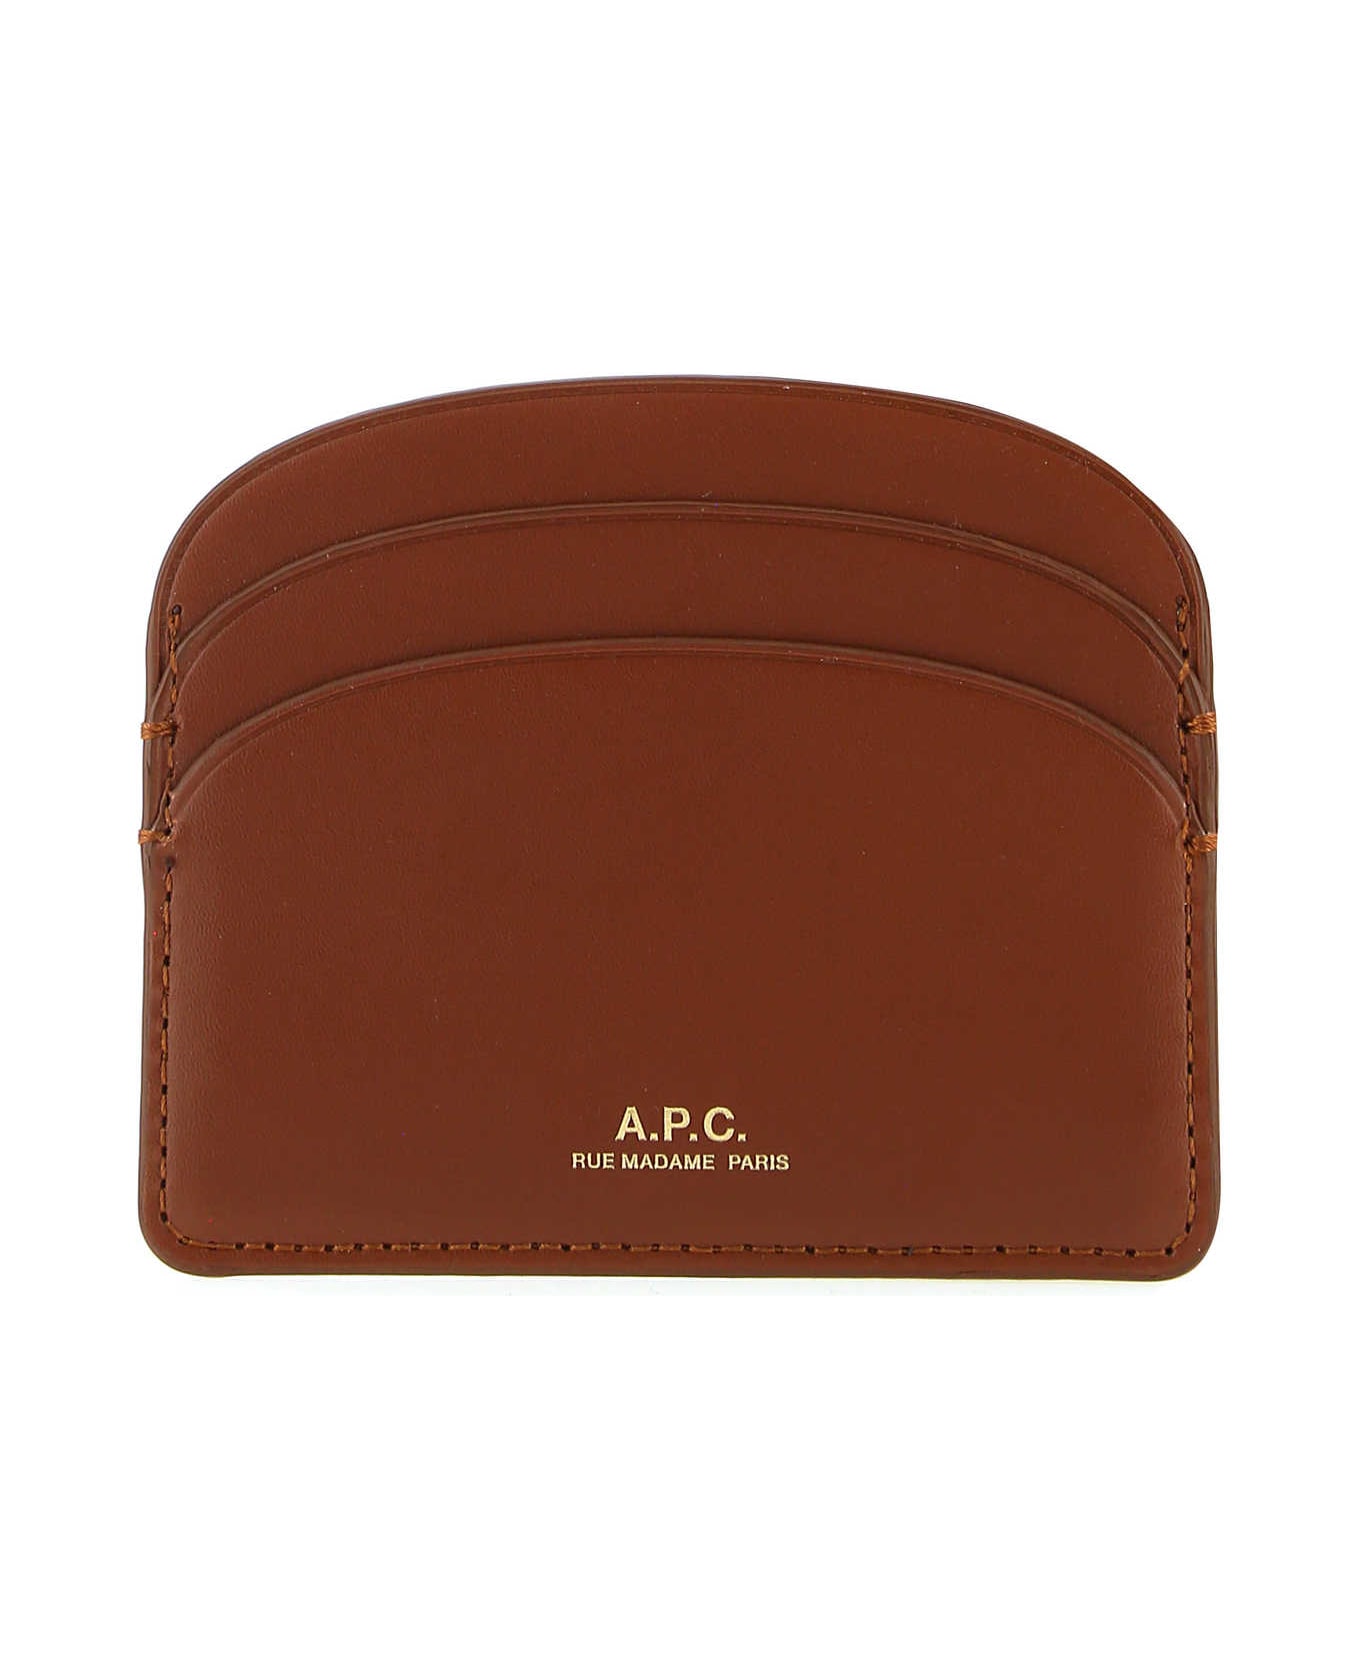 A.P.C. Brown Leather Card Holder - CAD